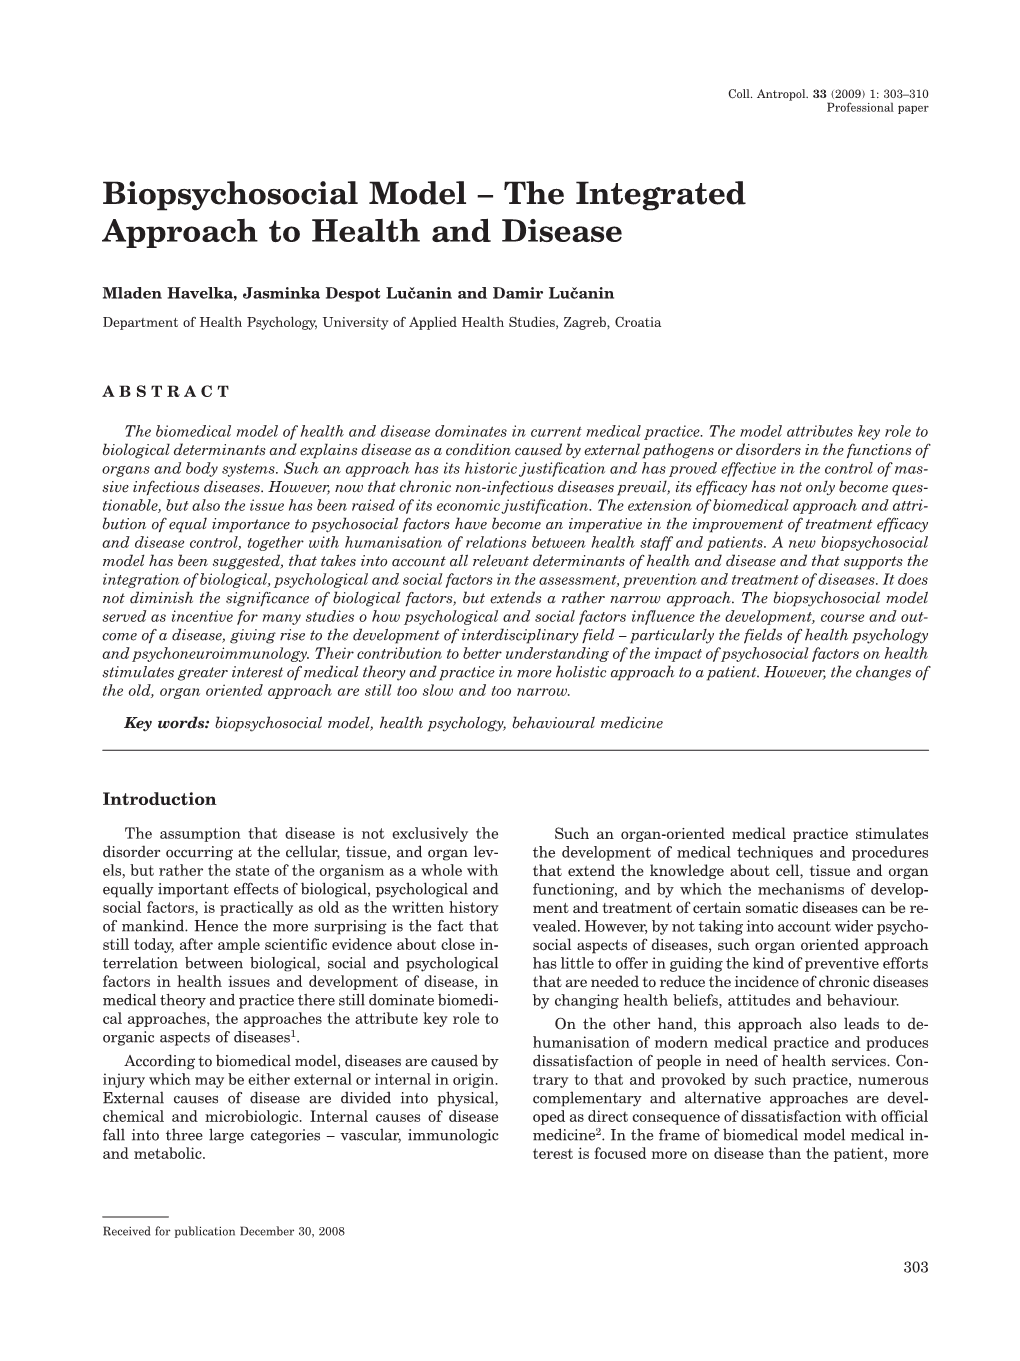 Biopsychosocial Model – the Integrated Approach to Health and Disease